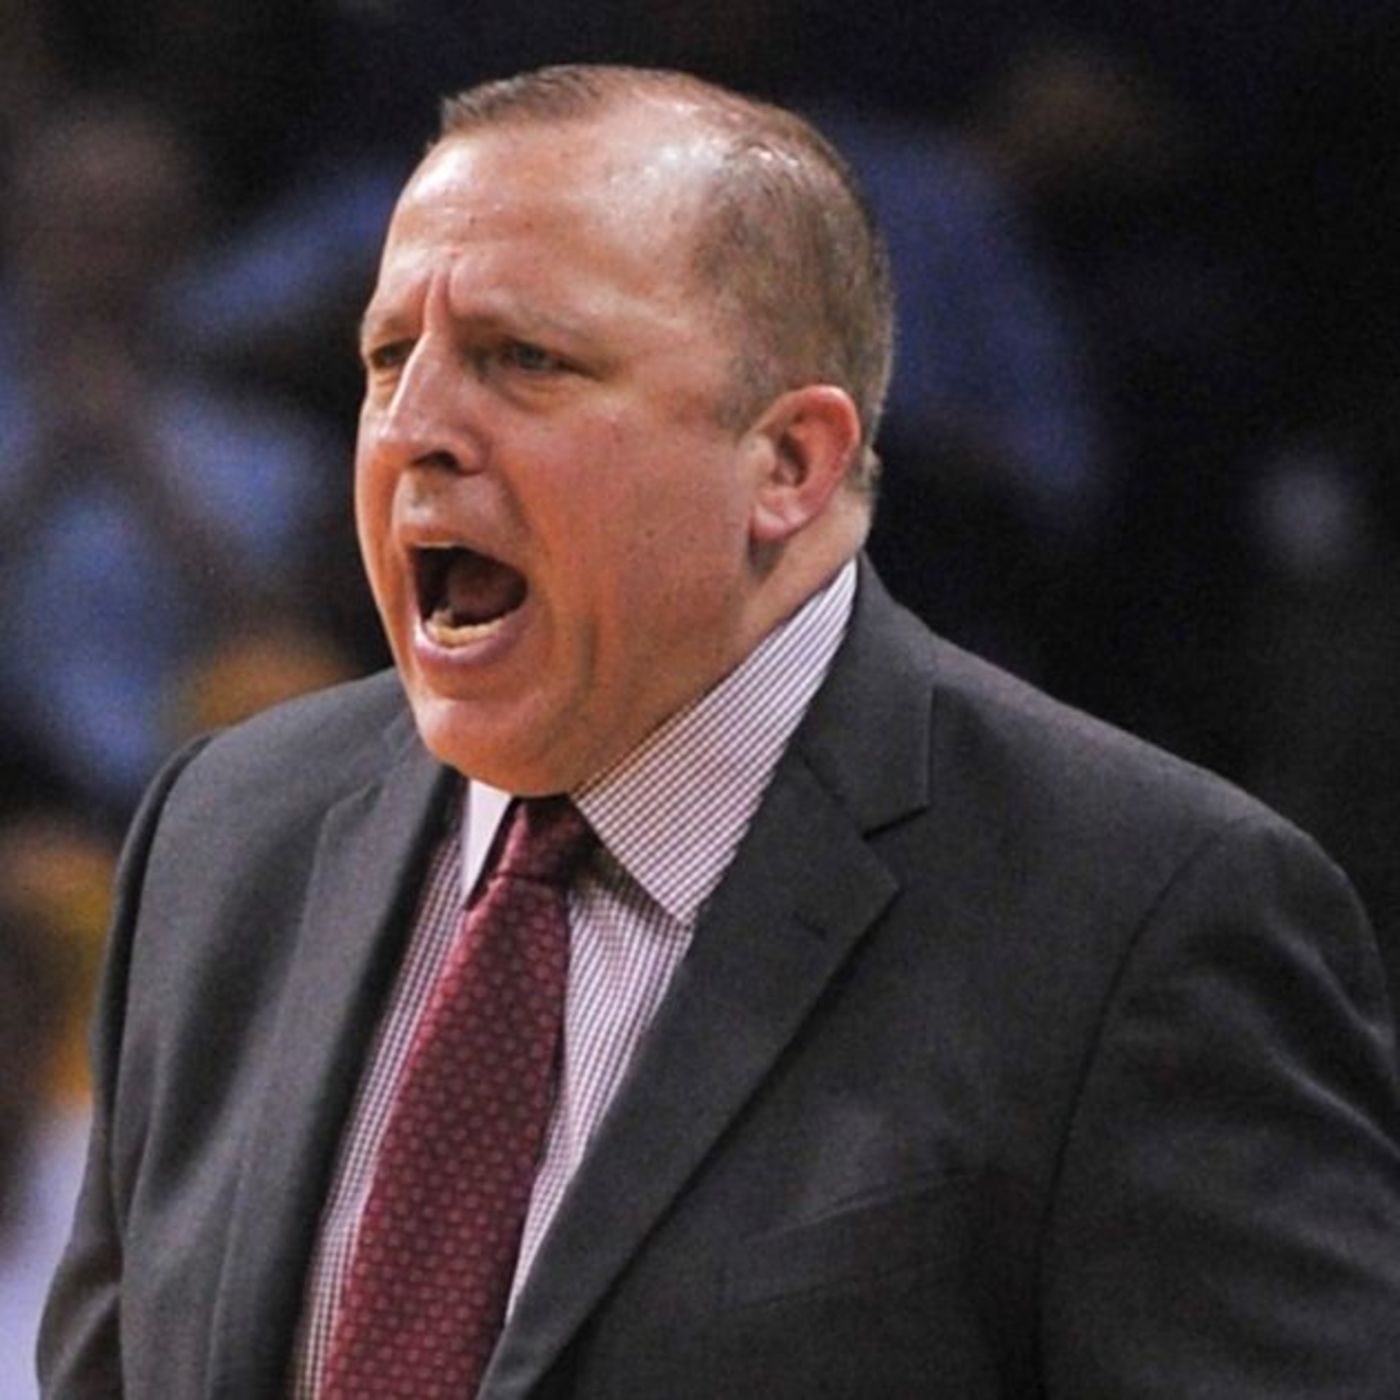 Tom Thibodeau on building the T'Wolves and his time off